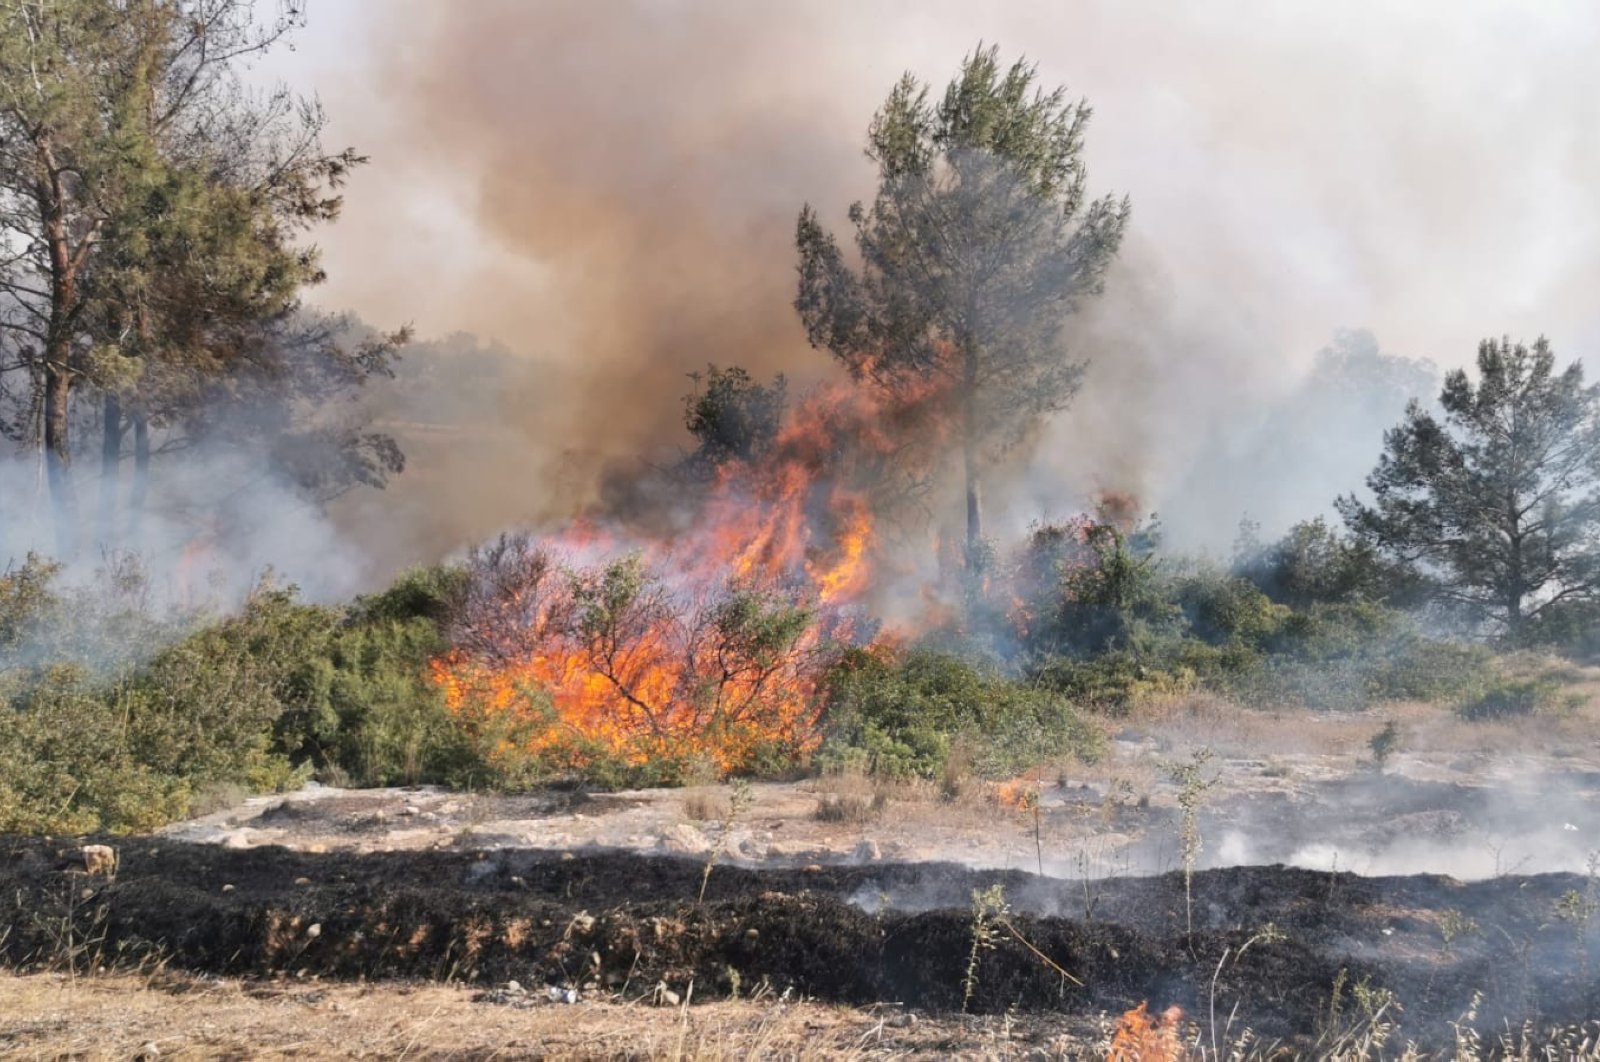 Wildfires burn trees in the Cypriot town of Girne, Turkish Republic of Northern Cyprus, May 17, 2020. (IHA Photo)